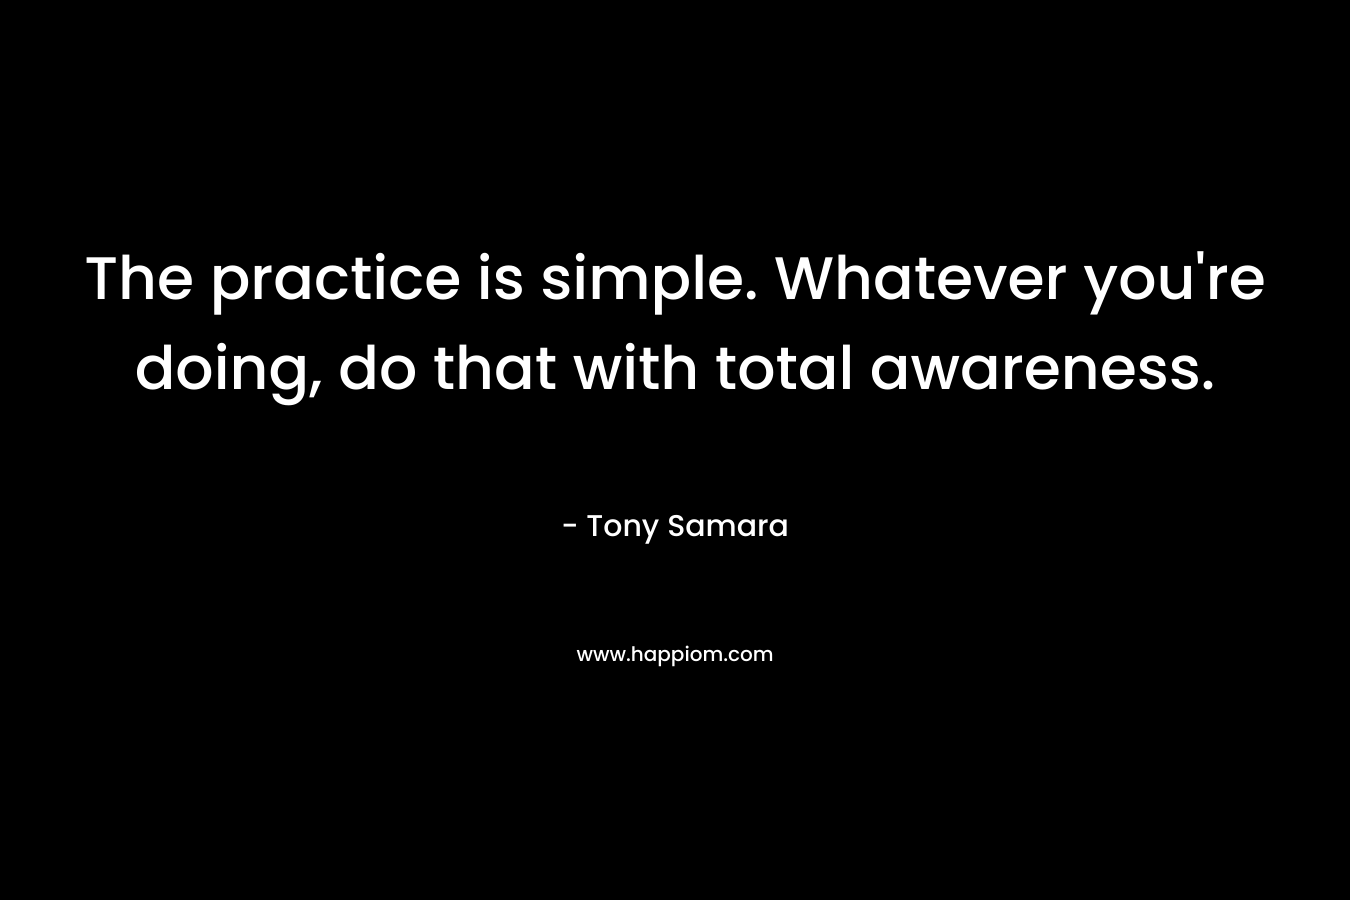 The practice is simple. Whatever you're doing, do that with total awareness.